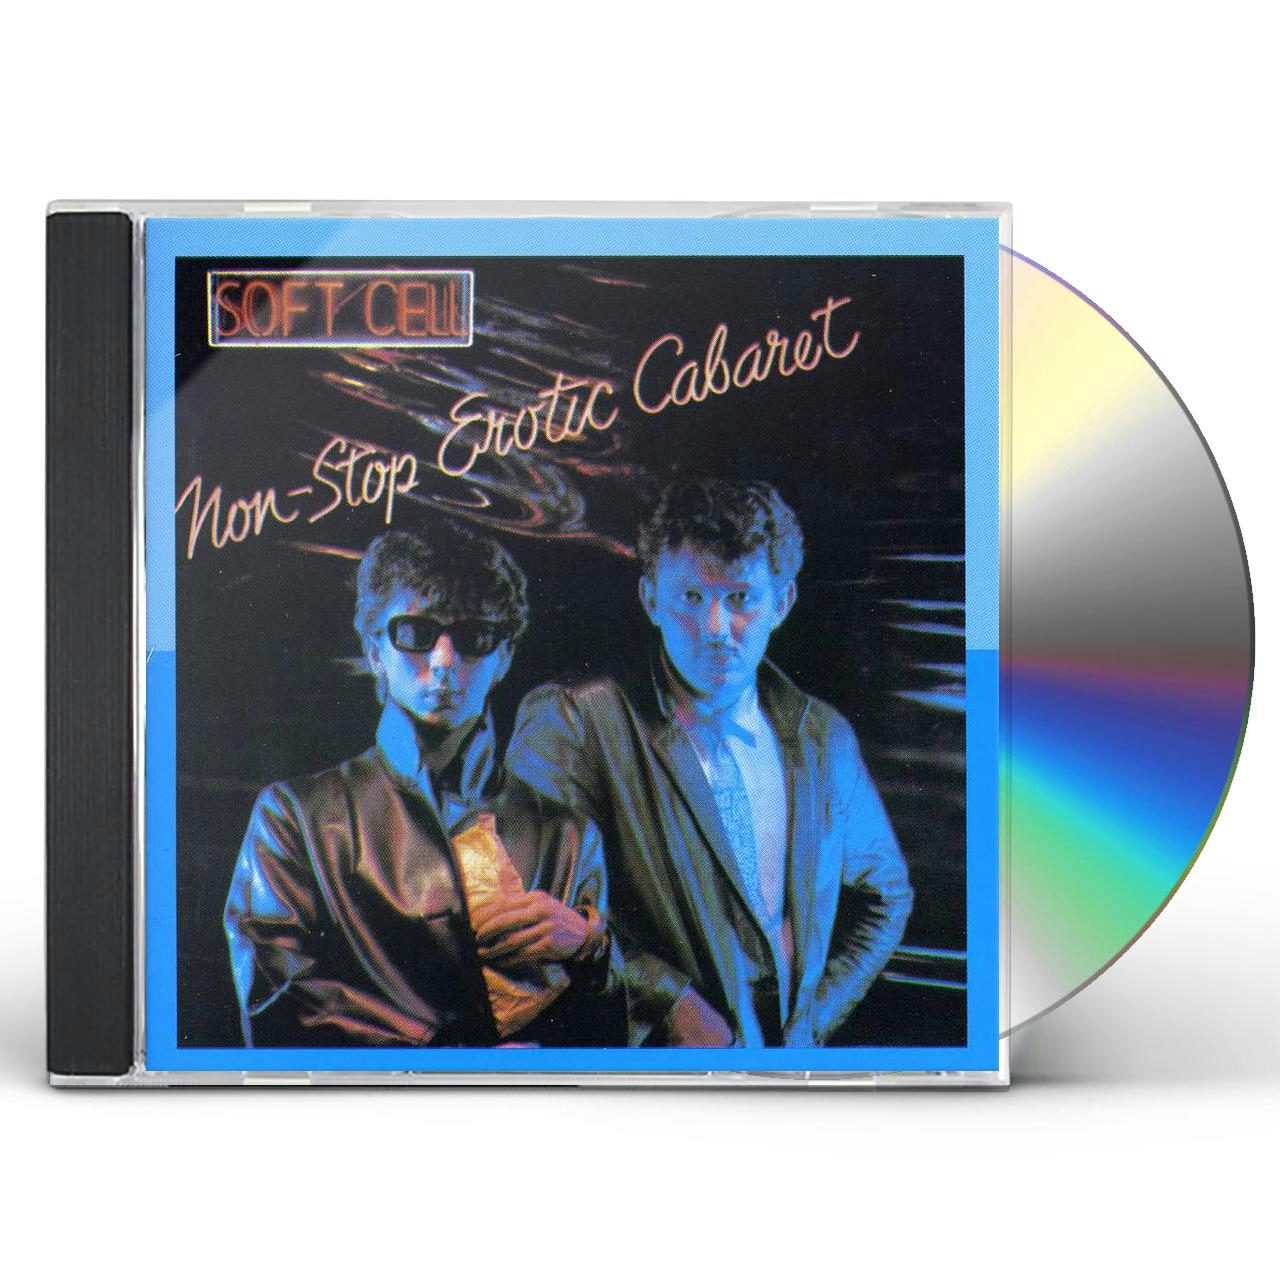 Soft Cell NON-STOP EROTIC CABARET CD $10.49$9.49